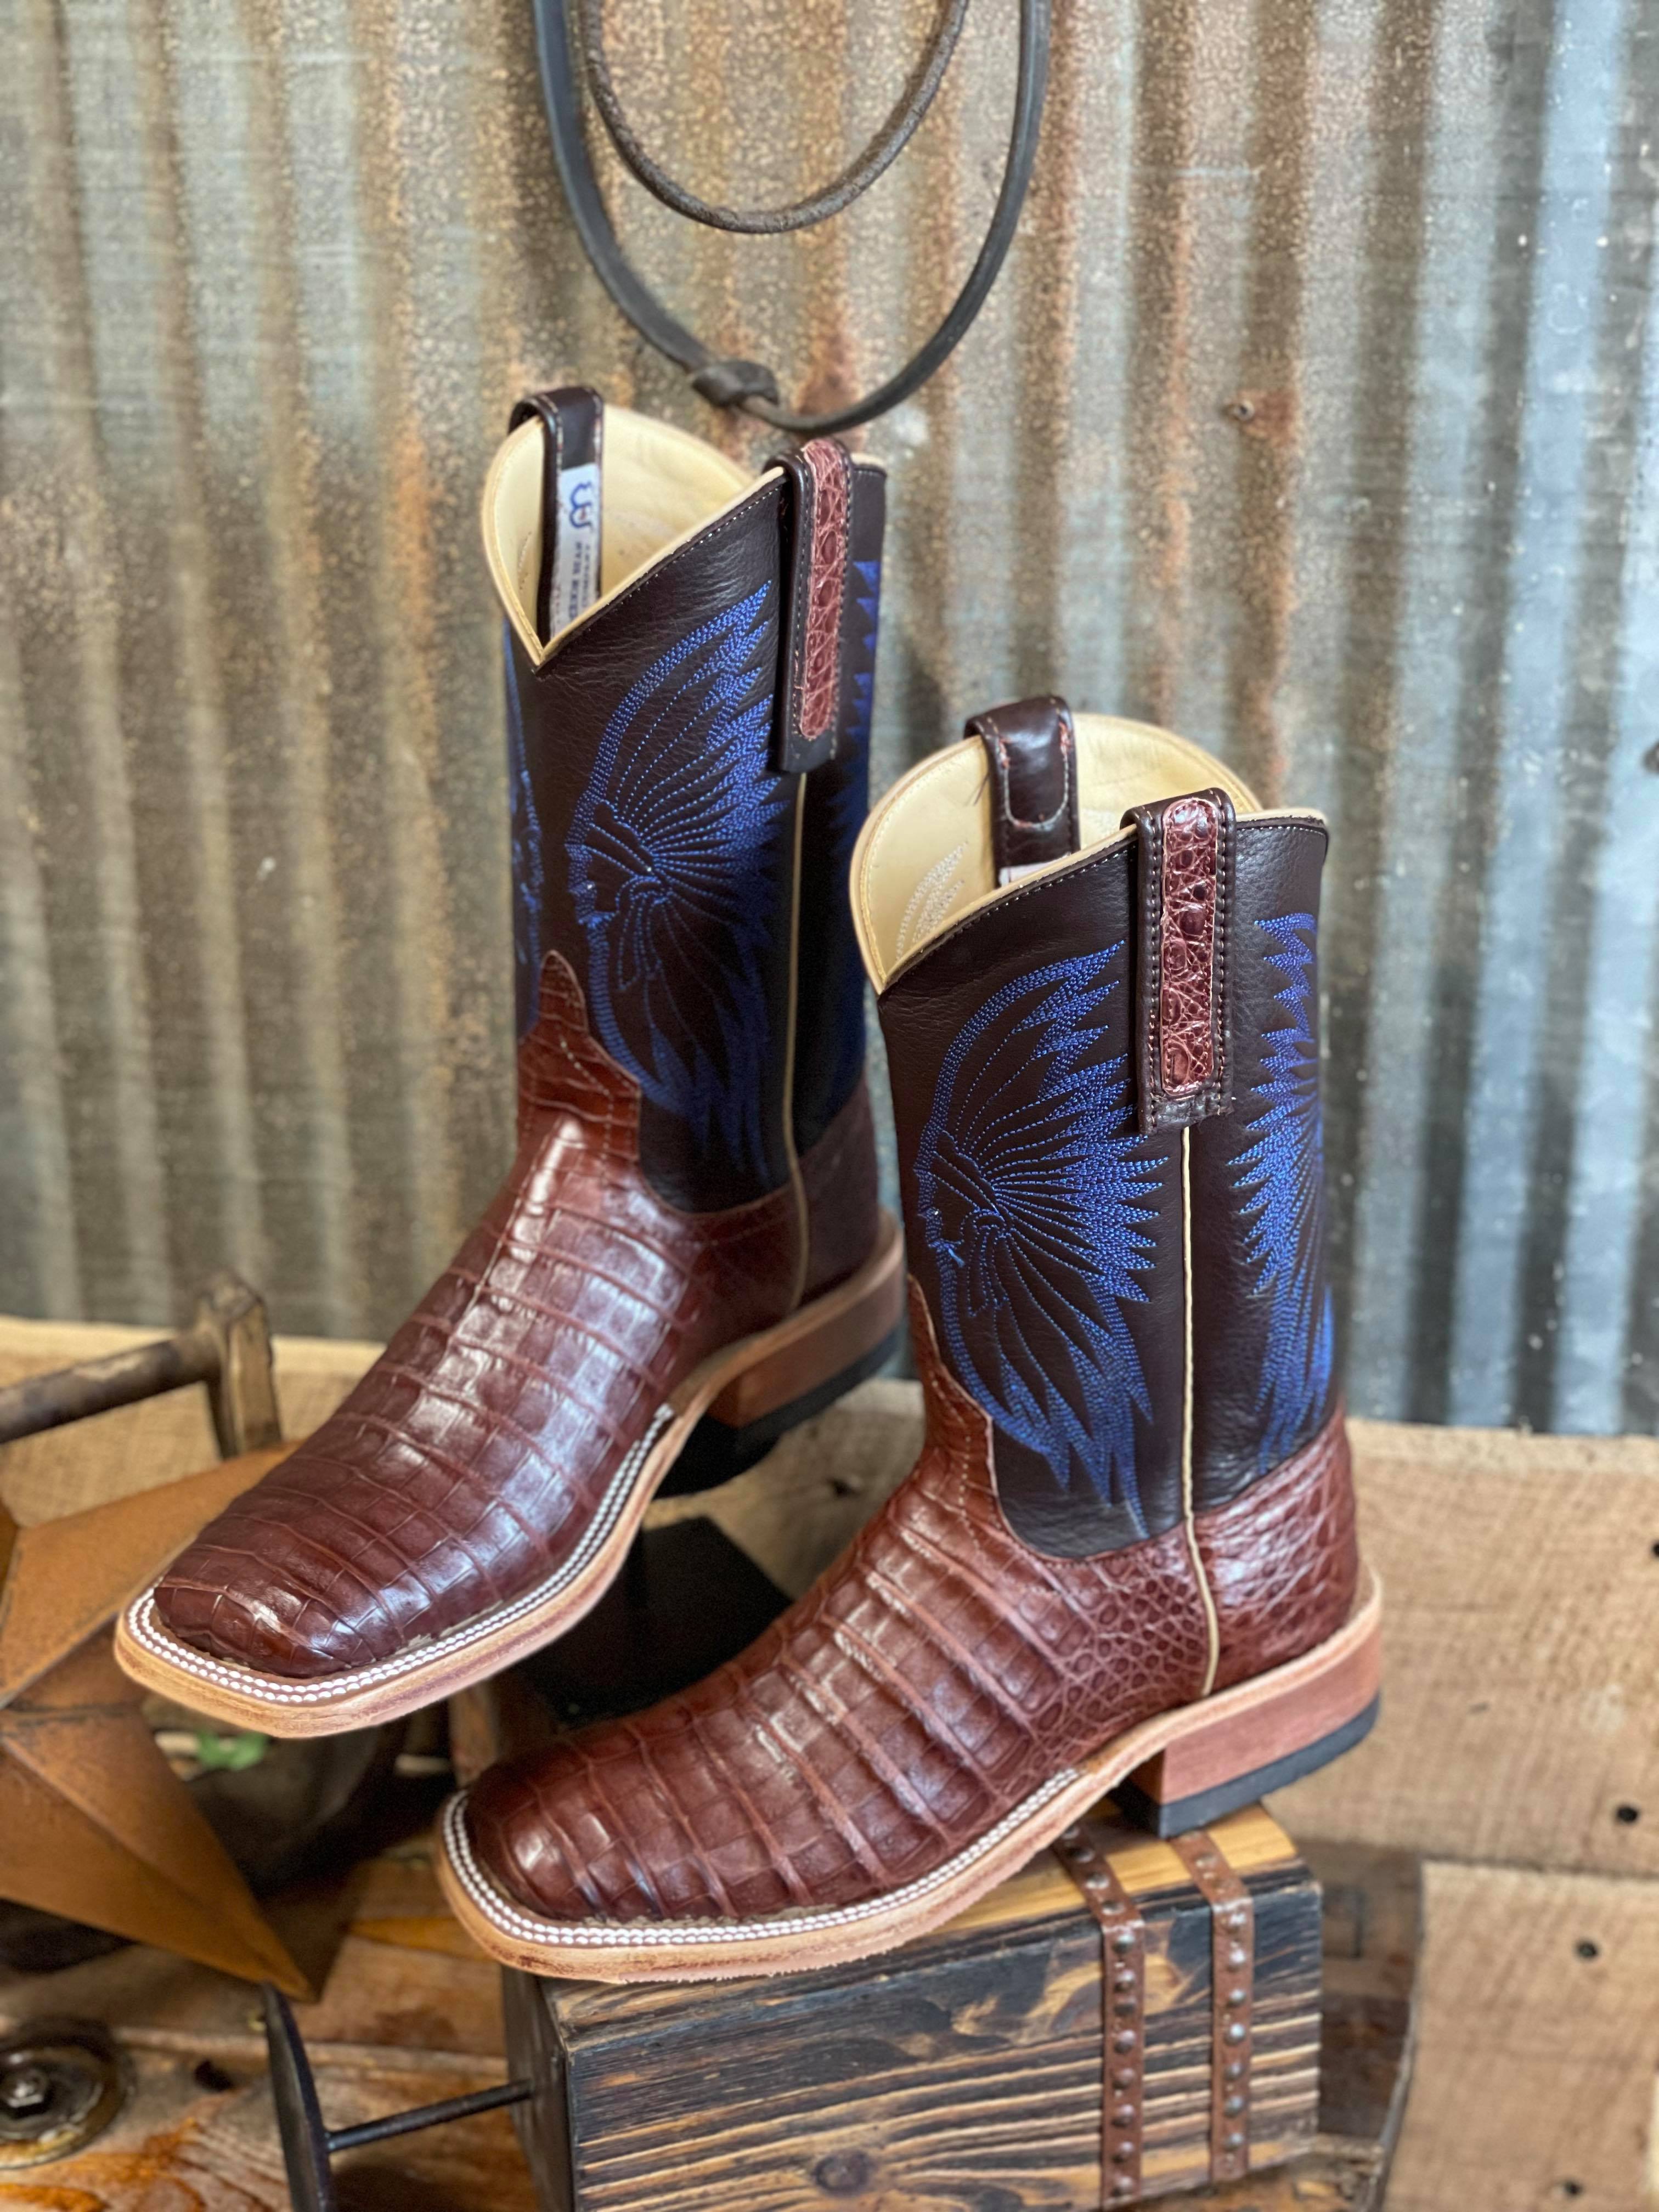 AB Women's Tobacco Caiman Belly-Women's Boots-Anderson Bean-Lucky J Boots & More, Women's, Men's, & Kids Western Store Located in Carthage, MO